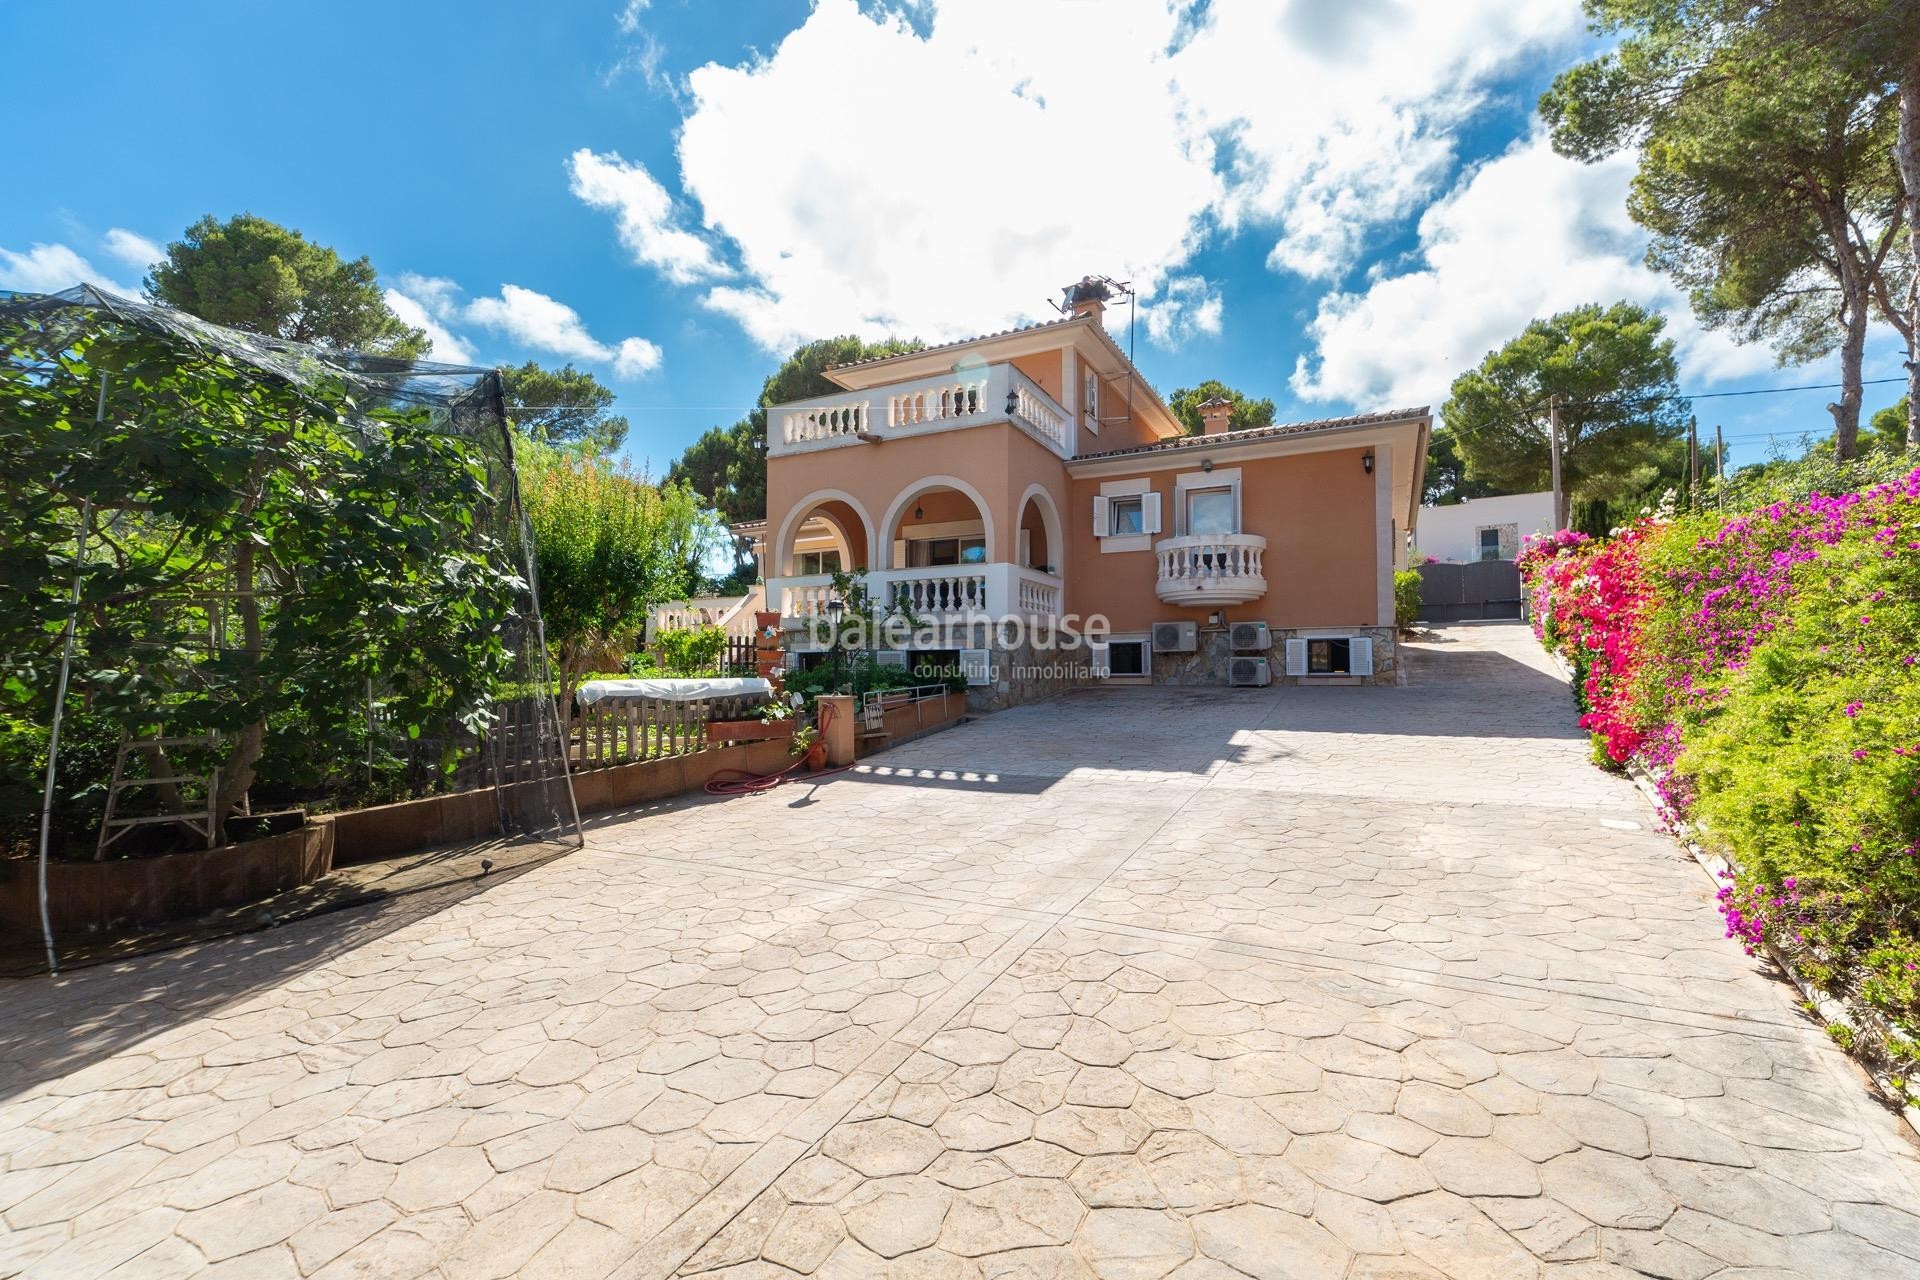 Nice villa with large garden area, pool and unobstructed mountain views in Santa Ponsa